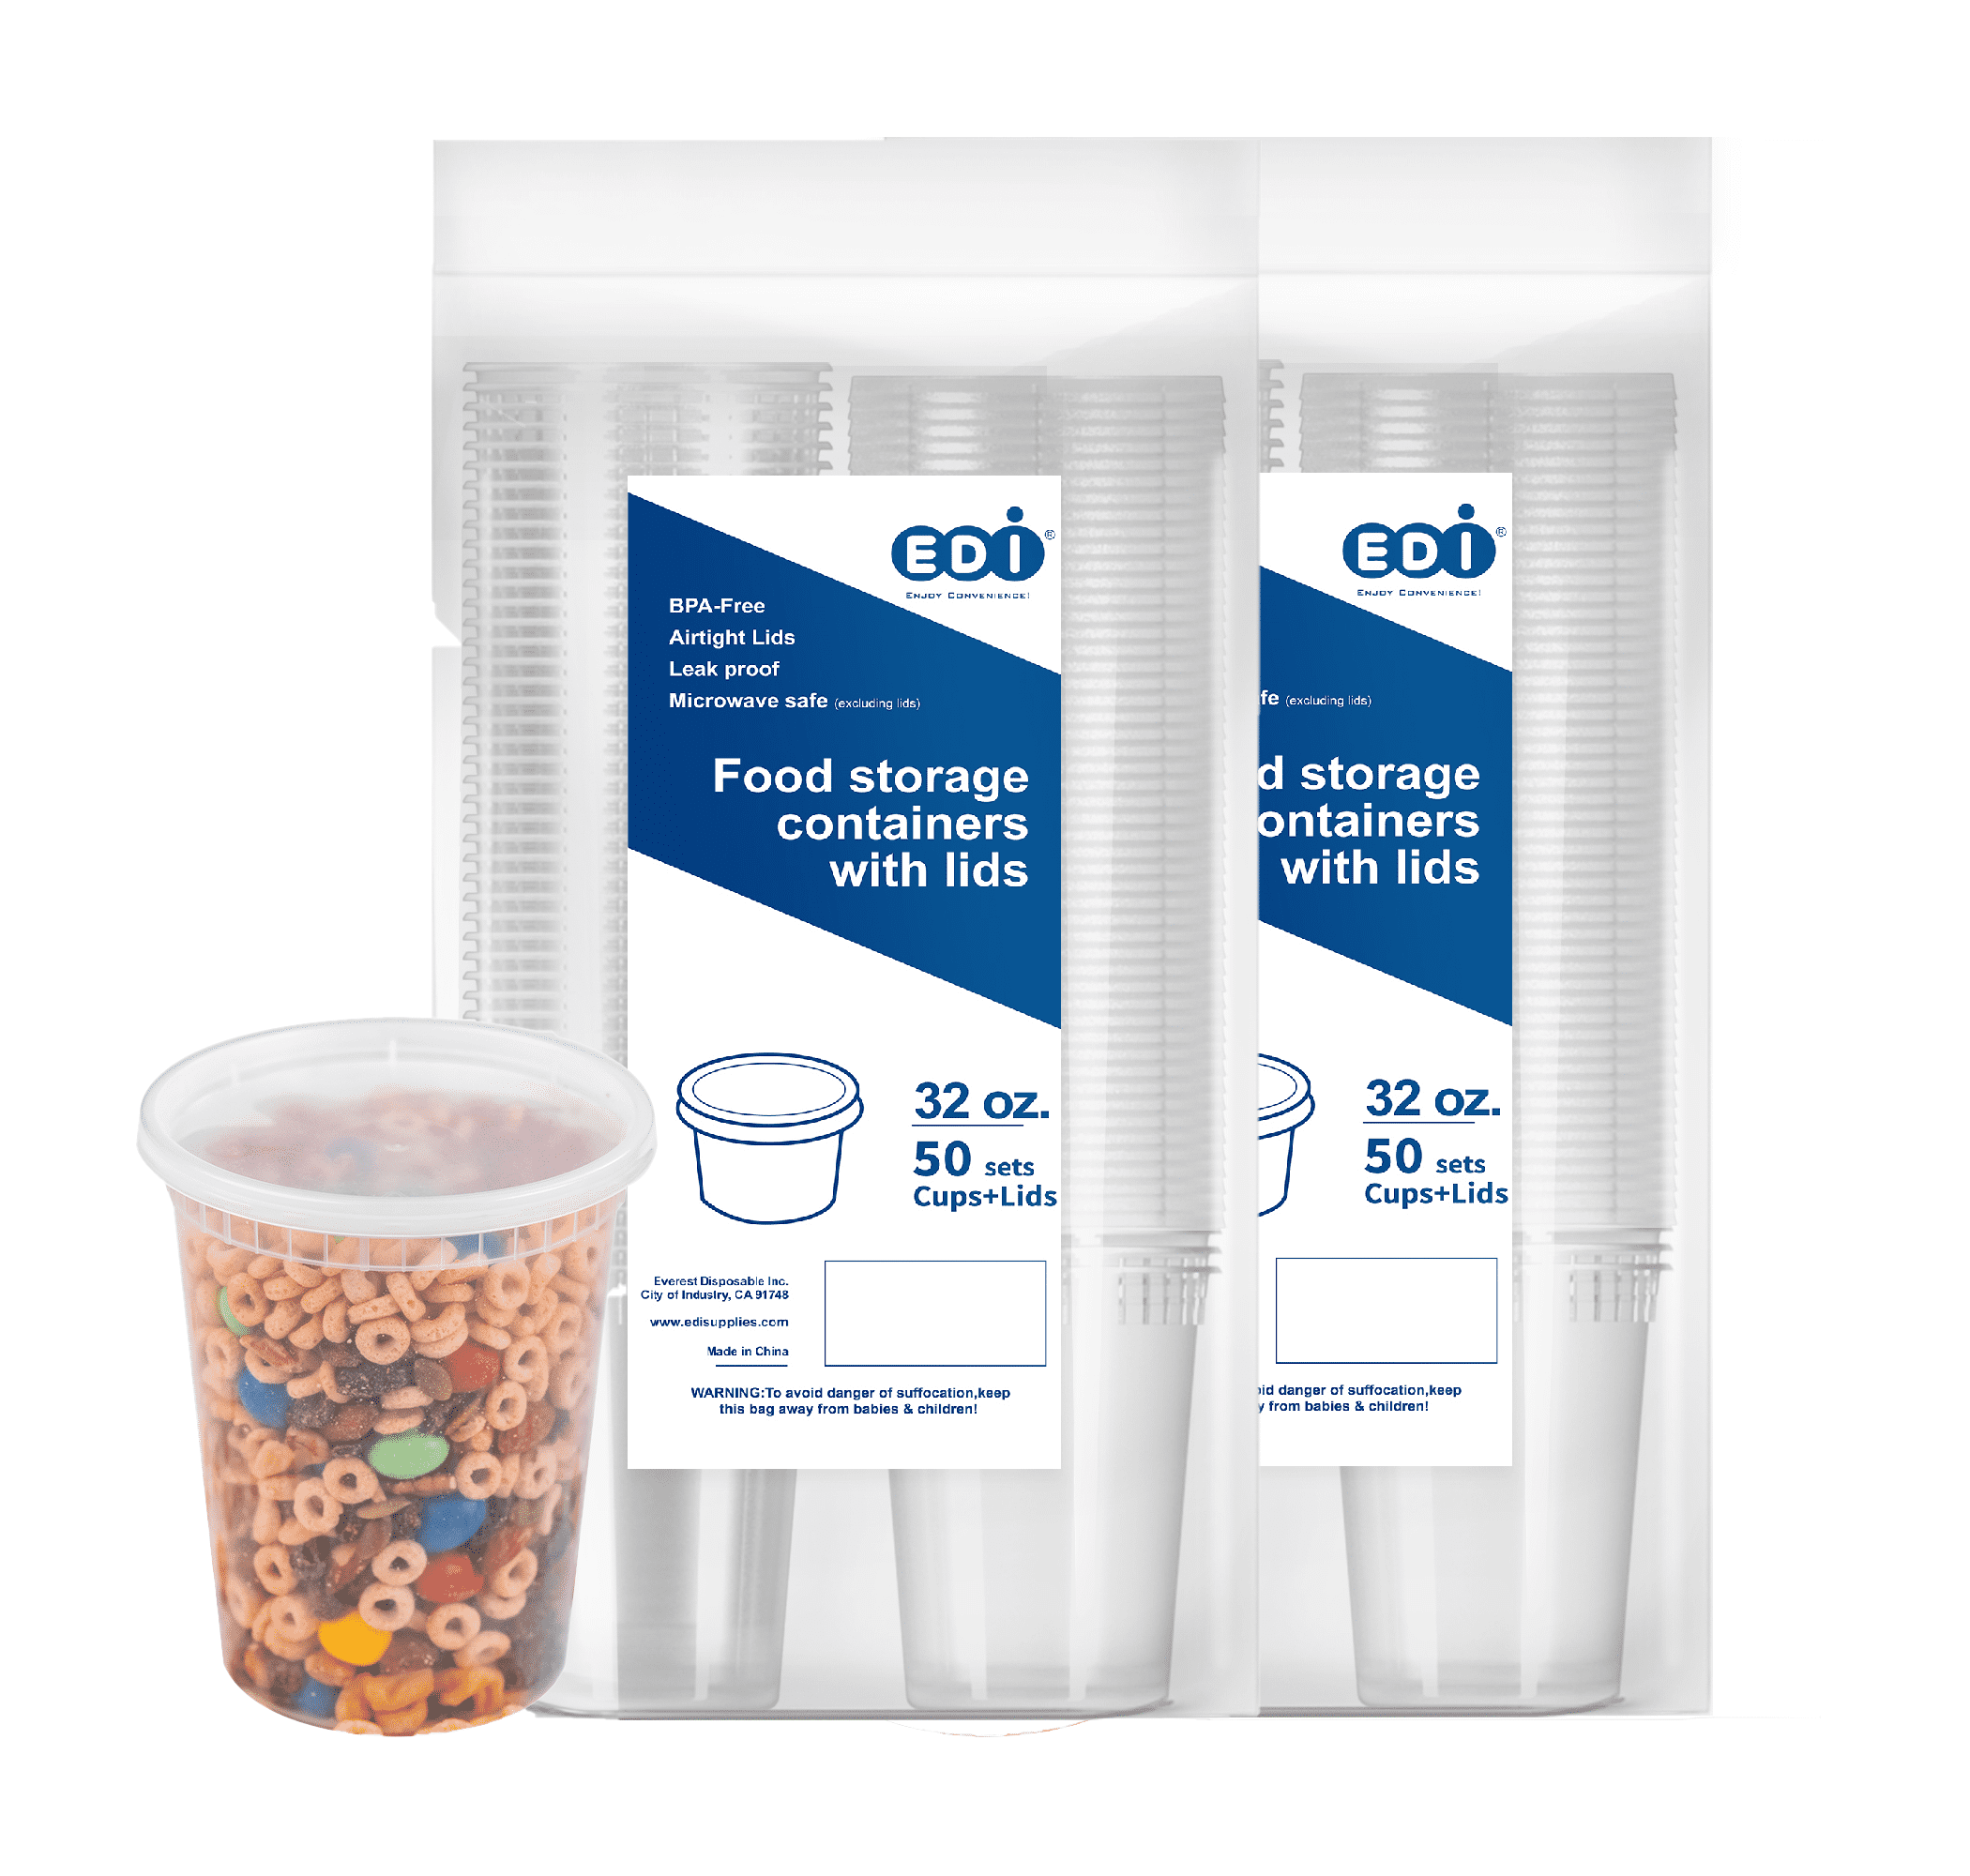 Ensbelei 16oz Food Storage Containers with Airtight Lids, 50Pcs Reusable  Deli Disposable Meal Prep Containers, Leakproof, Microwaveable, Dishwasher  